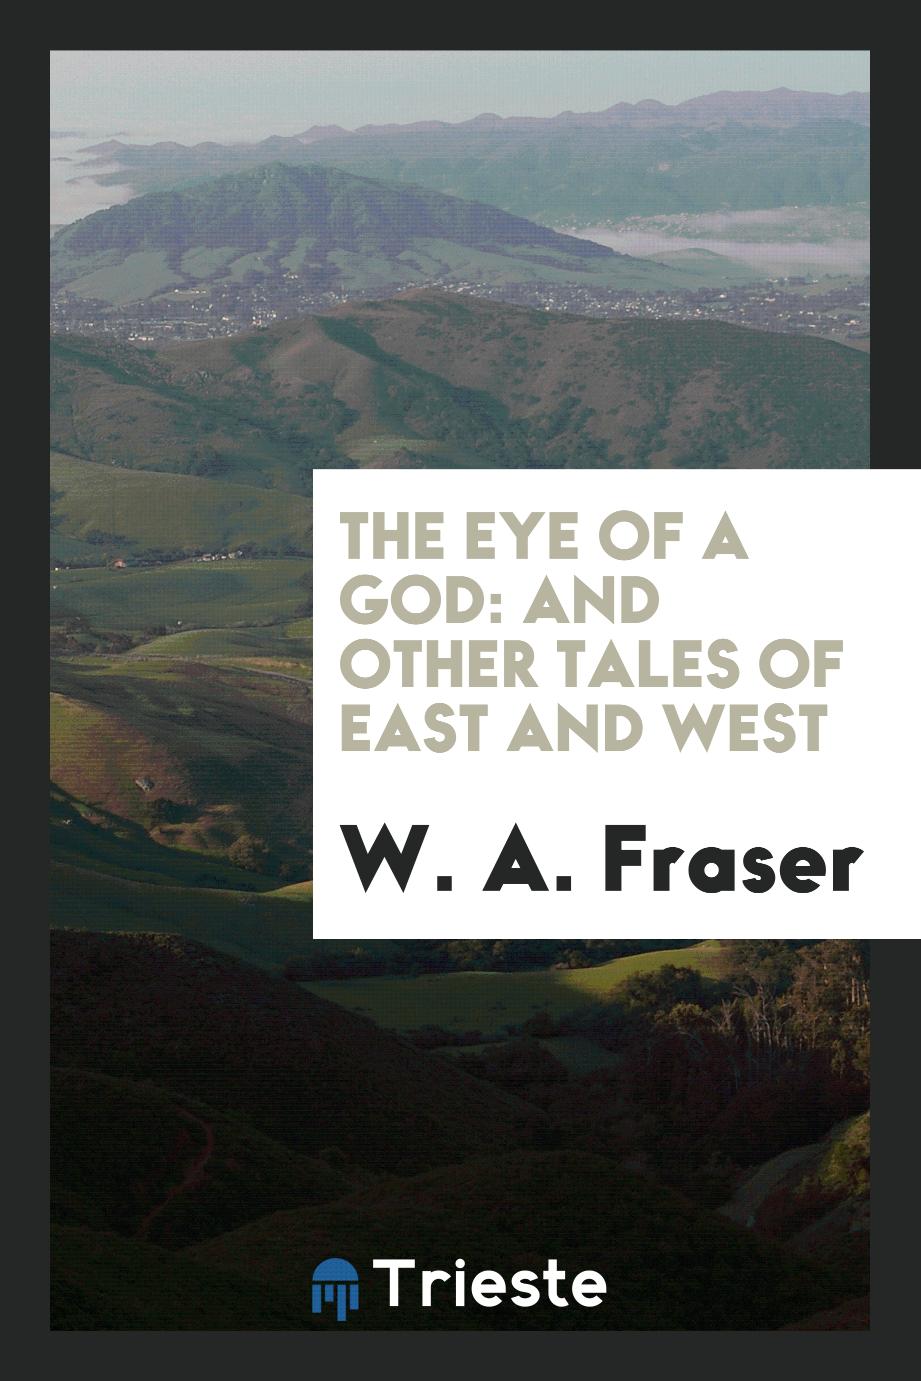 The eye of a god: and other tales of East and West